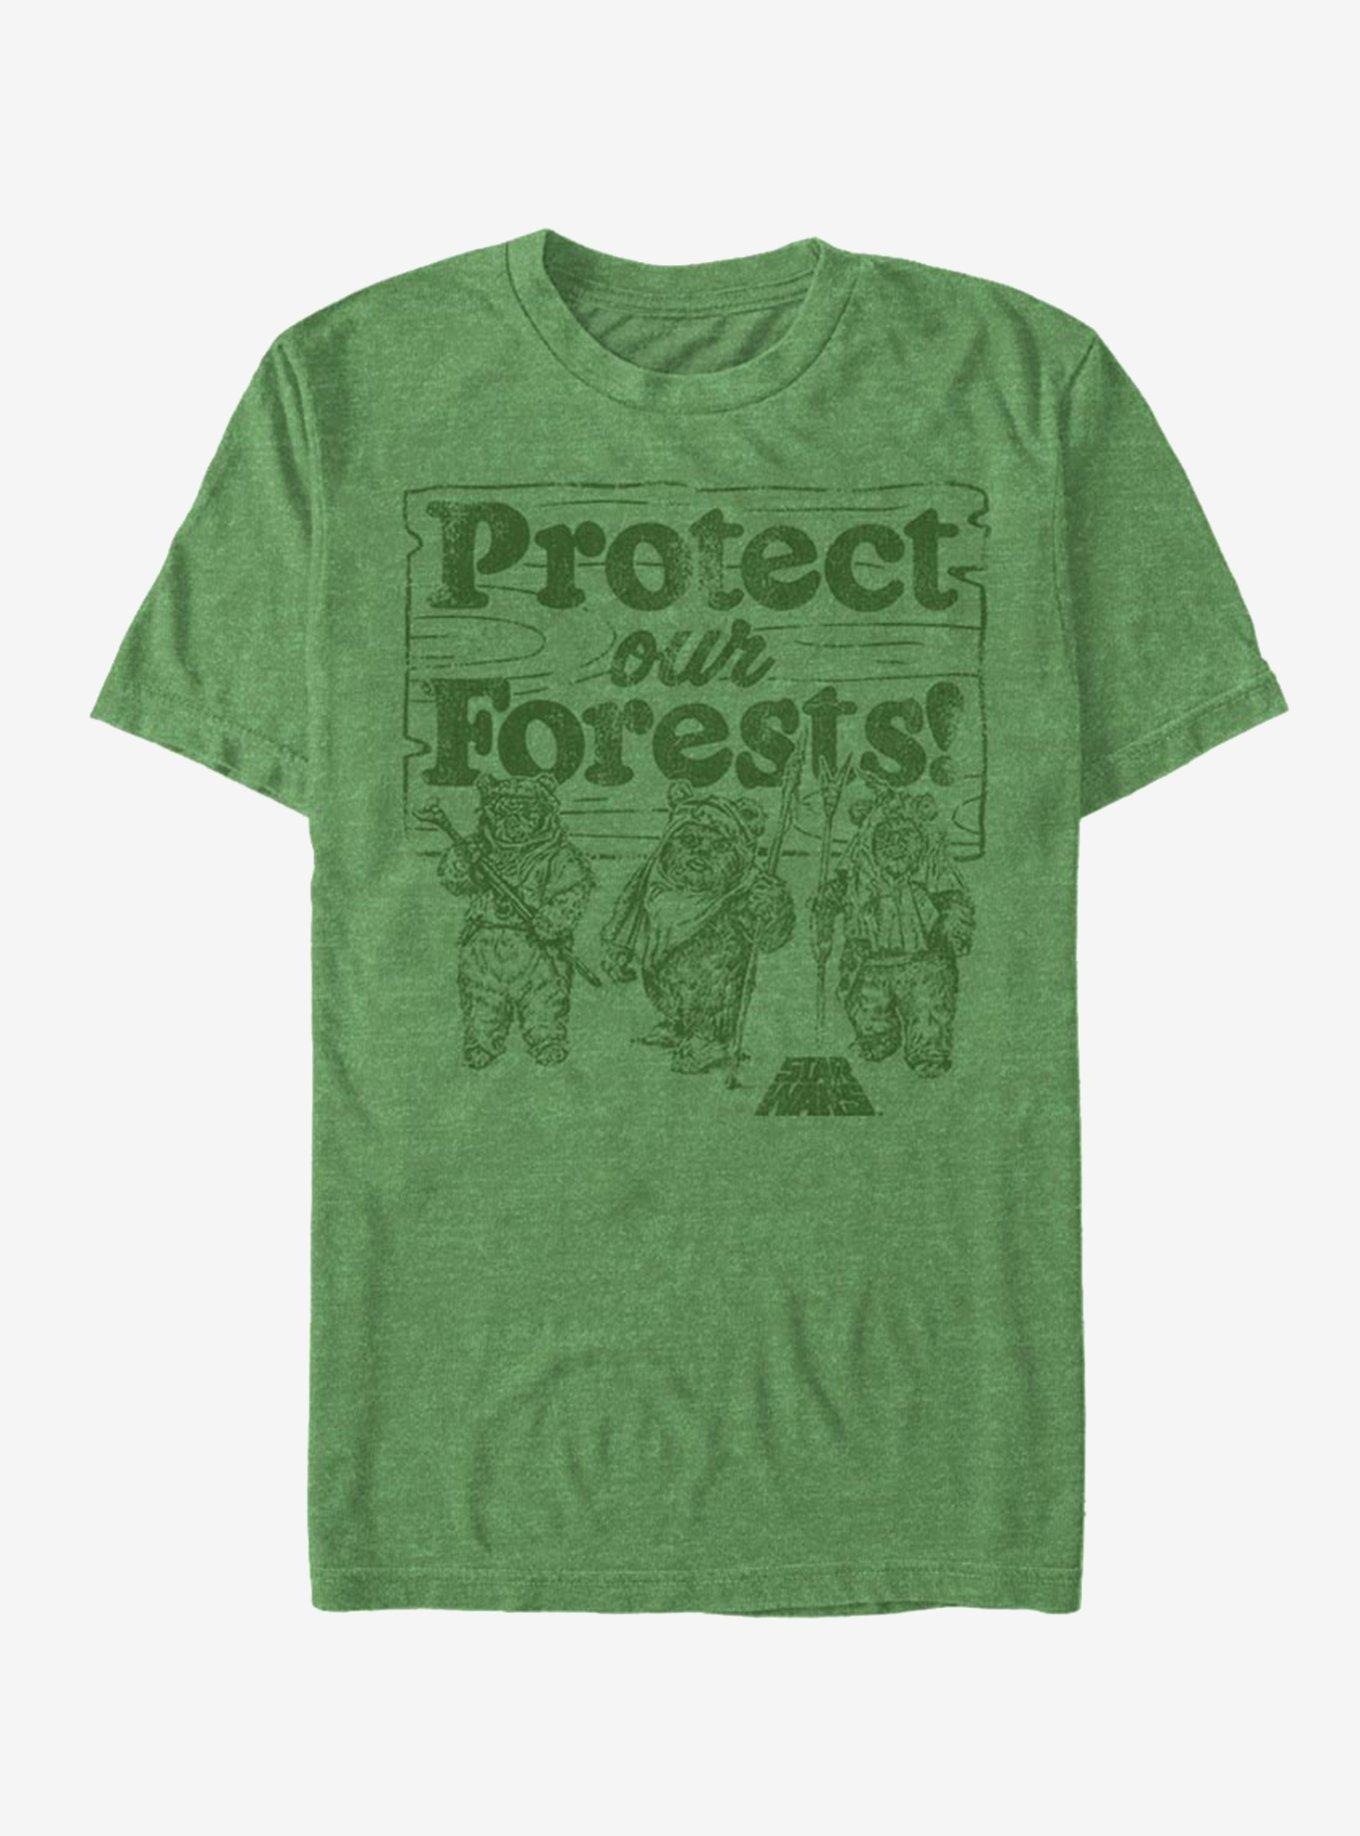 Star Wars Protect Our Forests T-Shirt, , hi-res